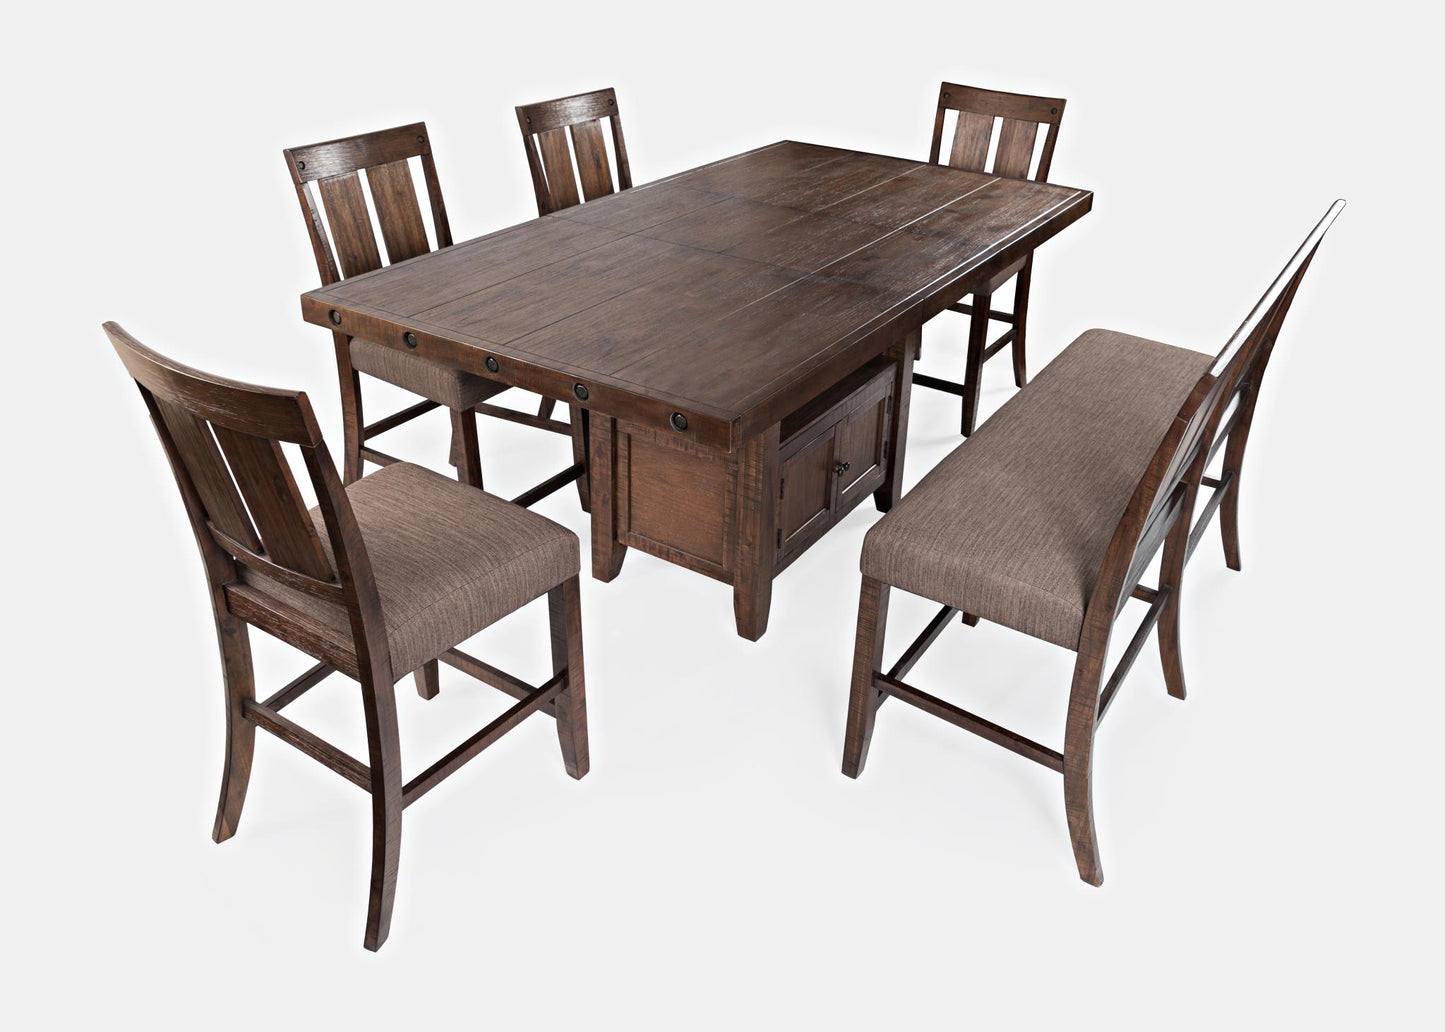 Mission Viejo Counter Table Set